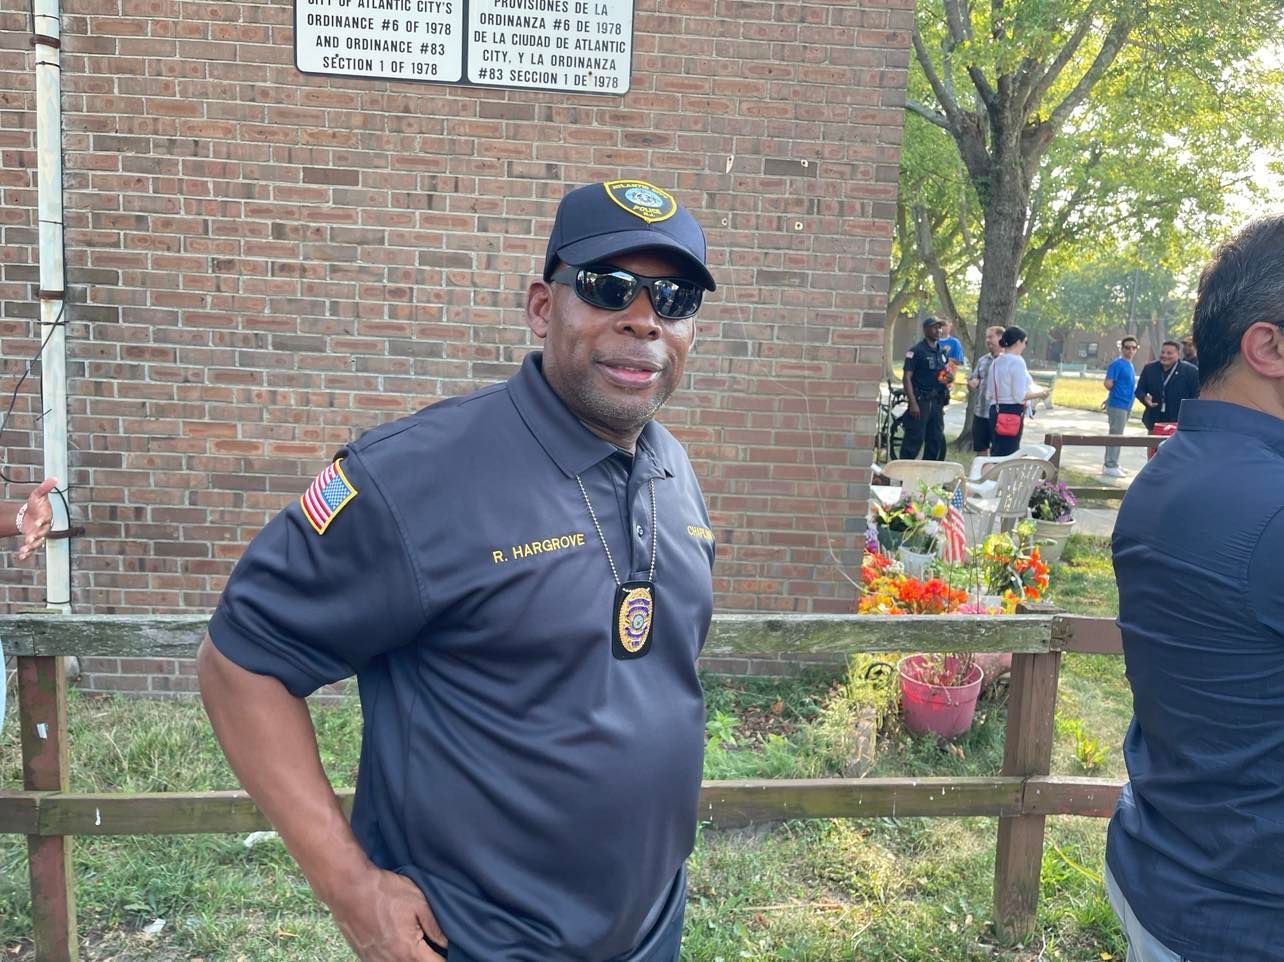 Bishop R. Fulton Hargrove II, president of the Fellowship of Churches of Atlantic City and the Vicinity, is a police chaplain who attended the community walk. Photo Credit: Mark Tyler